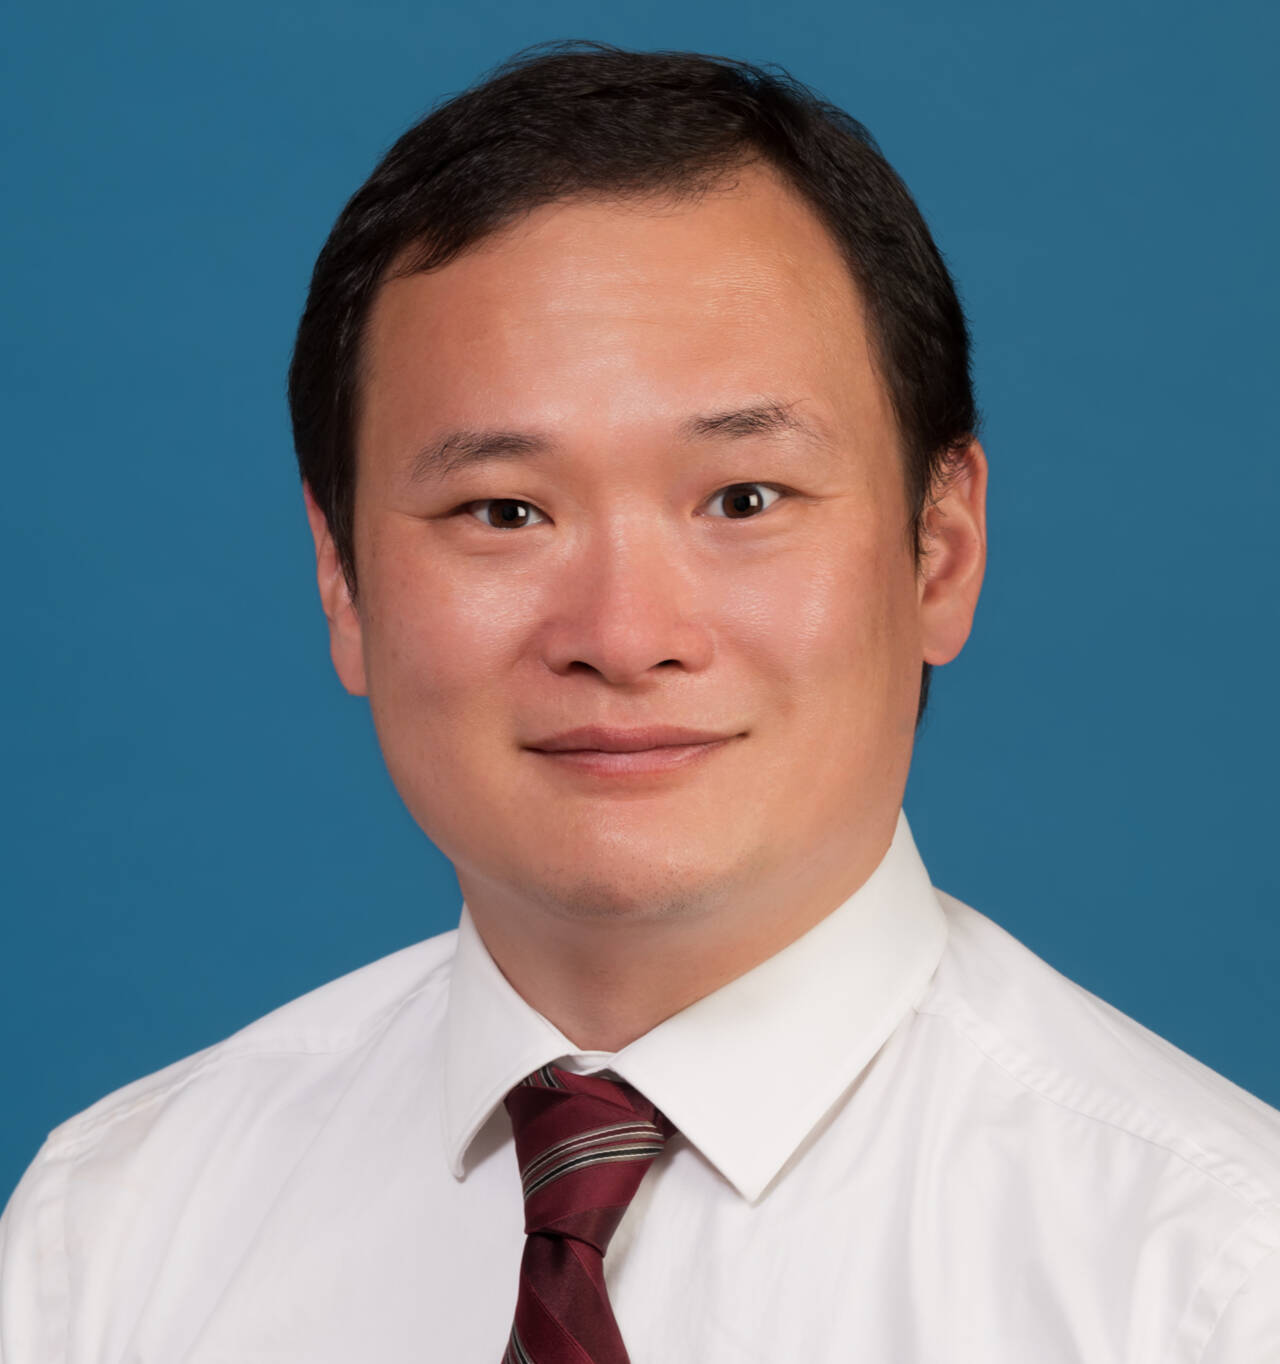 Photo courtesy of Olympic Medical Center / Stephen Woo has joined the Olympic Medical Physicians primary care team.